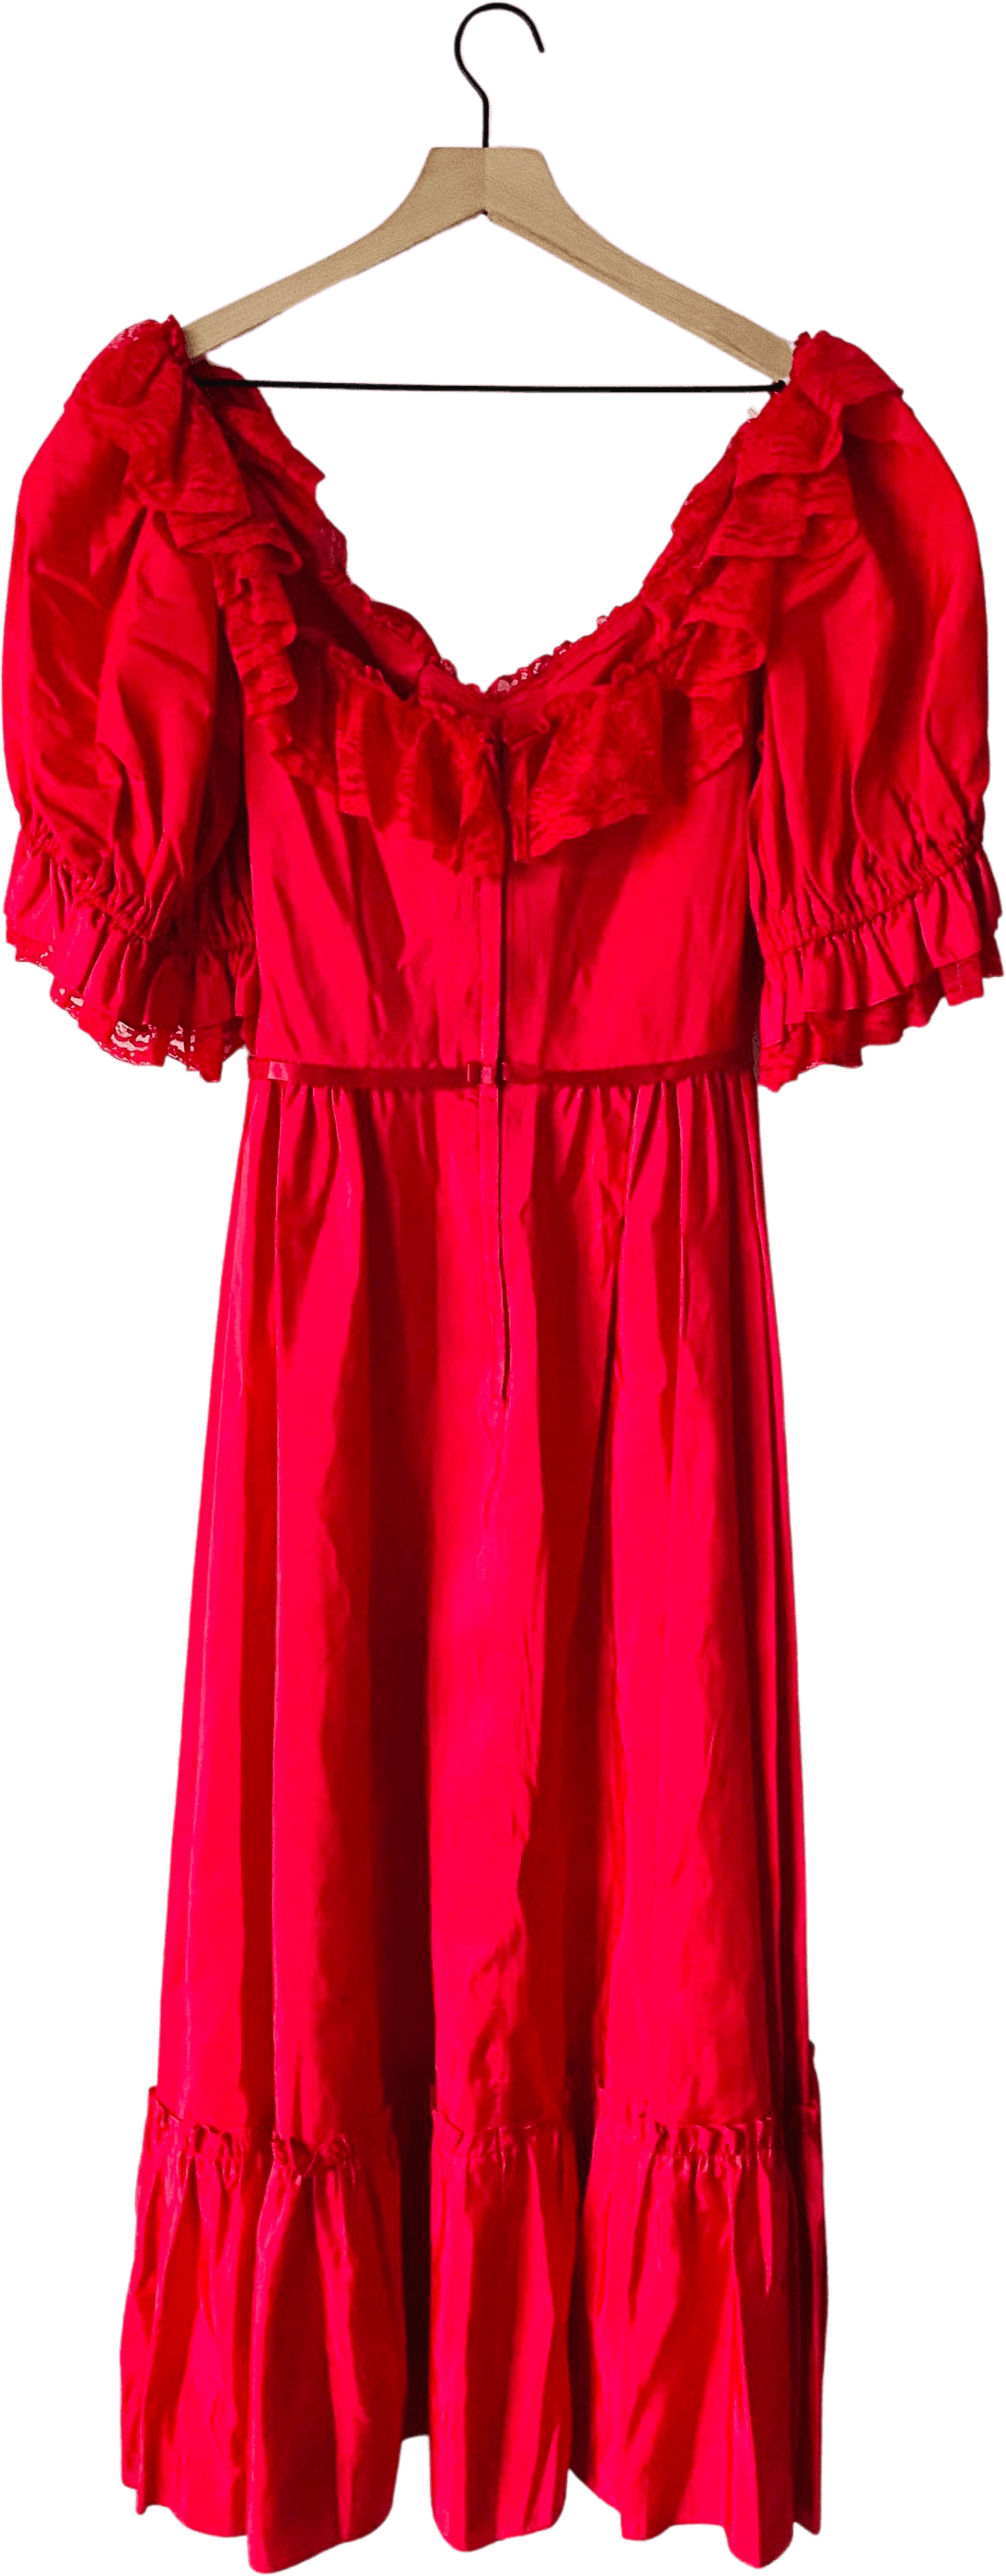 Vintage 70's Red Ruffle Dance Dress by Dance Allure | Shop THRILLING